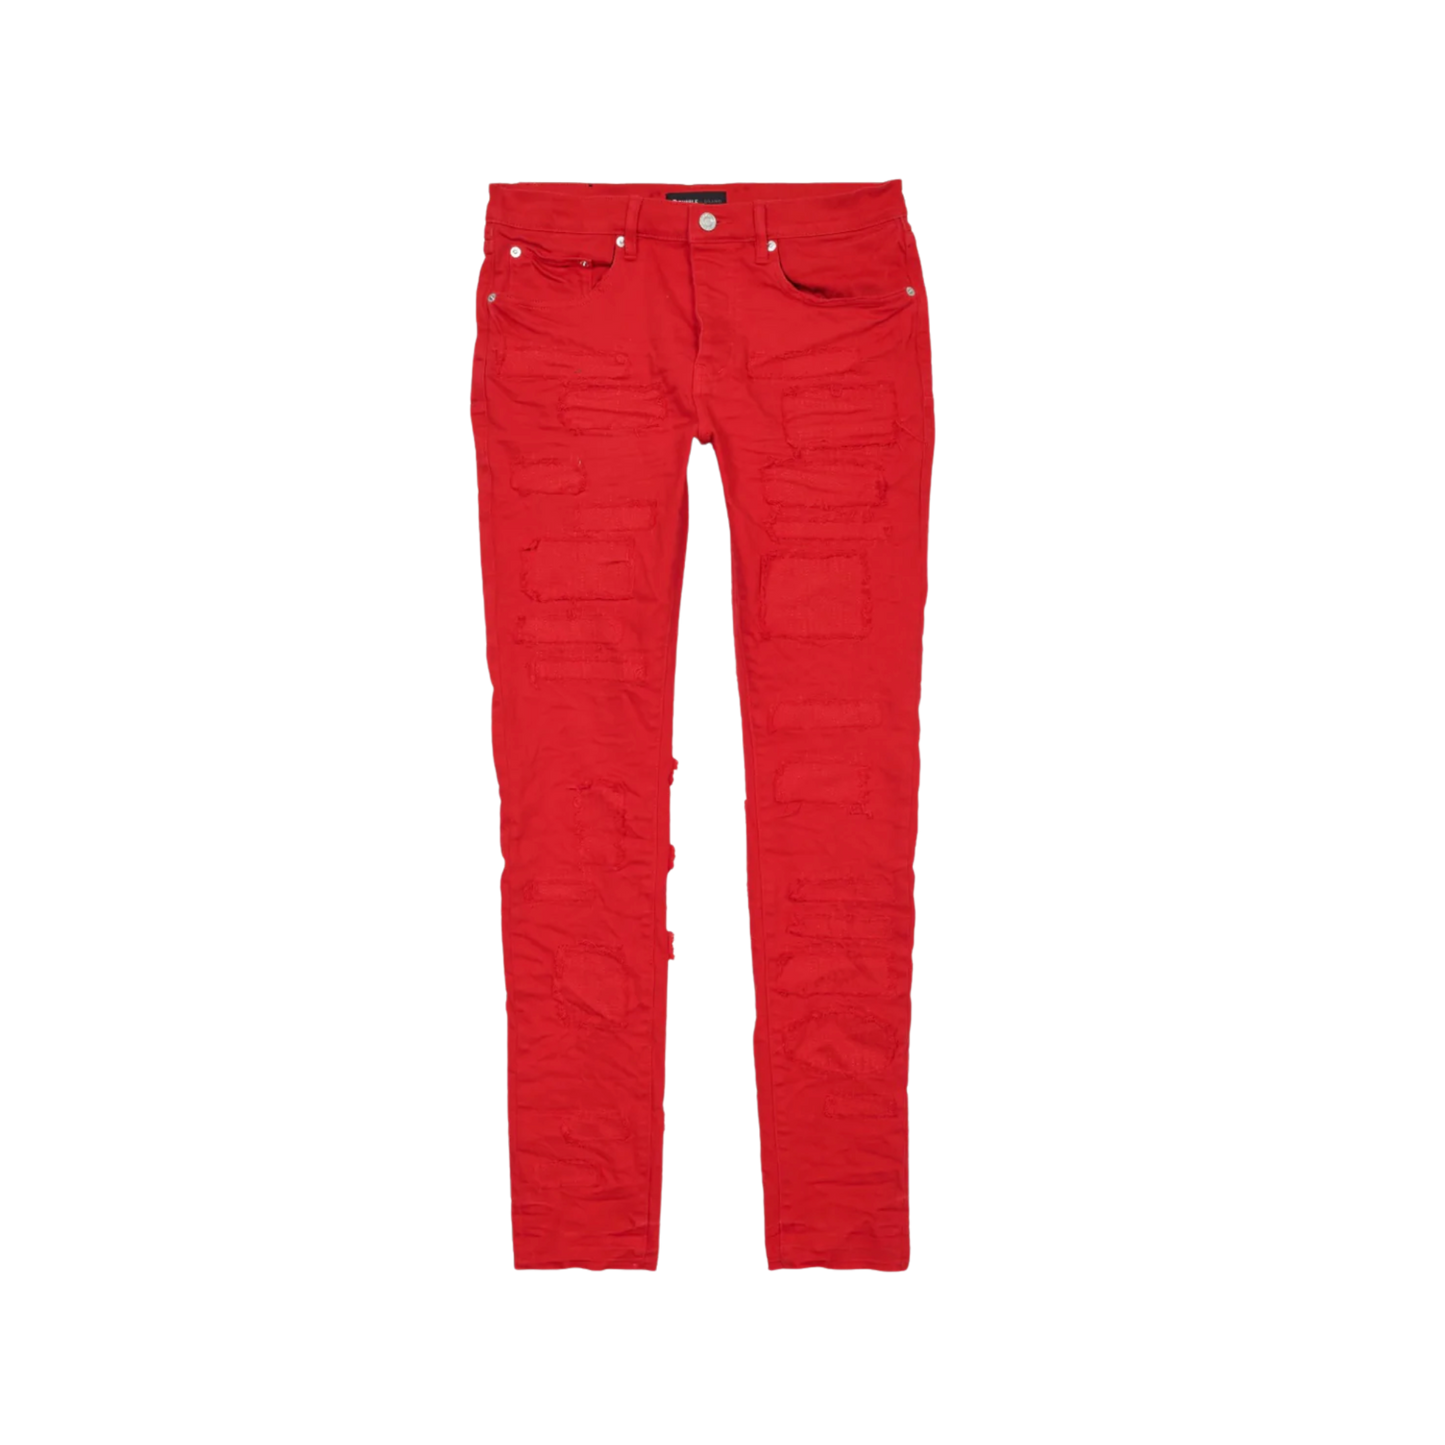 PURPLE BRAND JEANS LOW RISE SKINNY JEAN - RED JACKET PATCH REPAIR